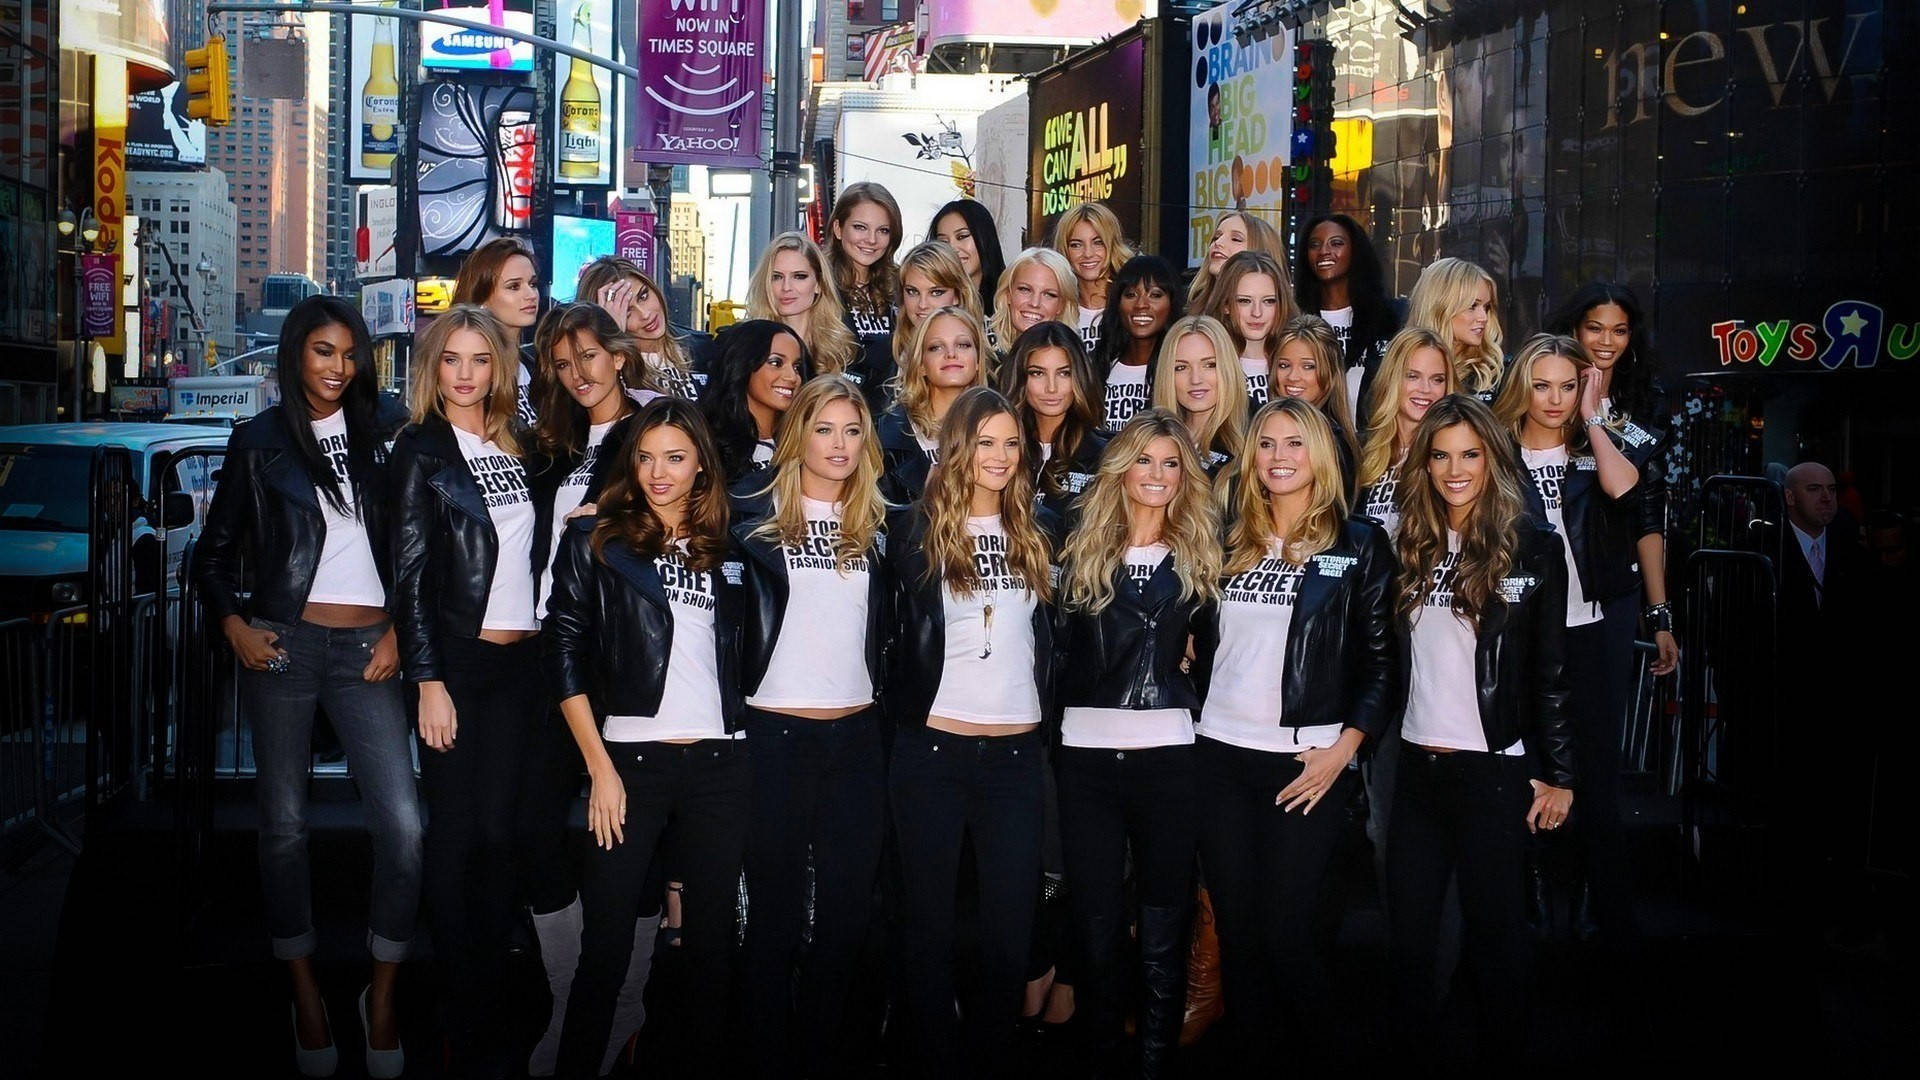 Victoria's Secret Angels At Times Square Background